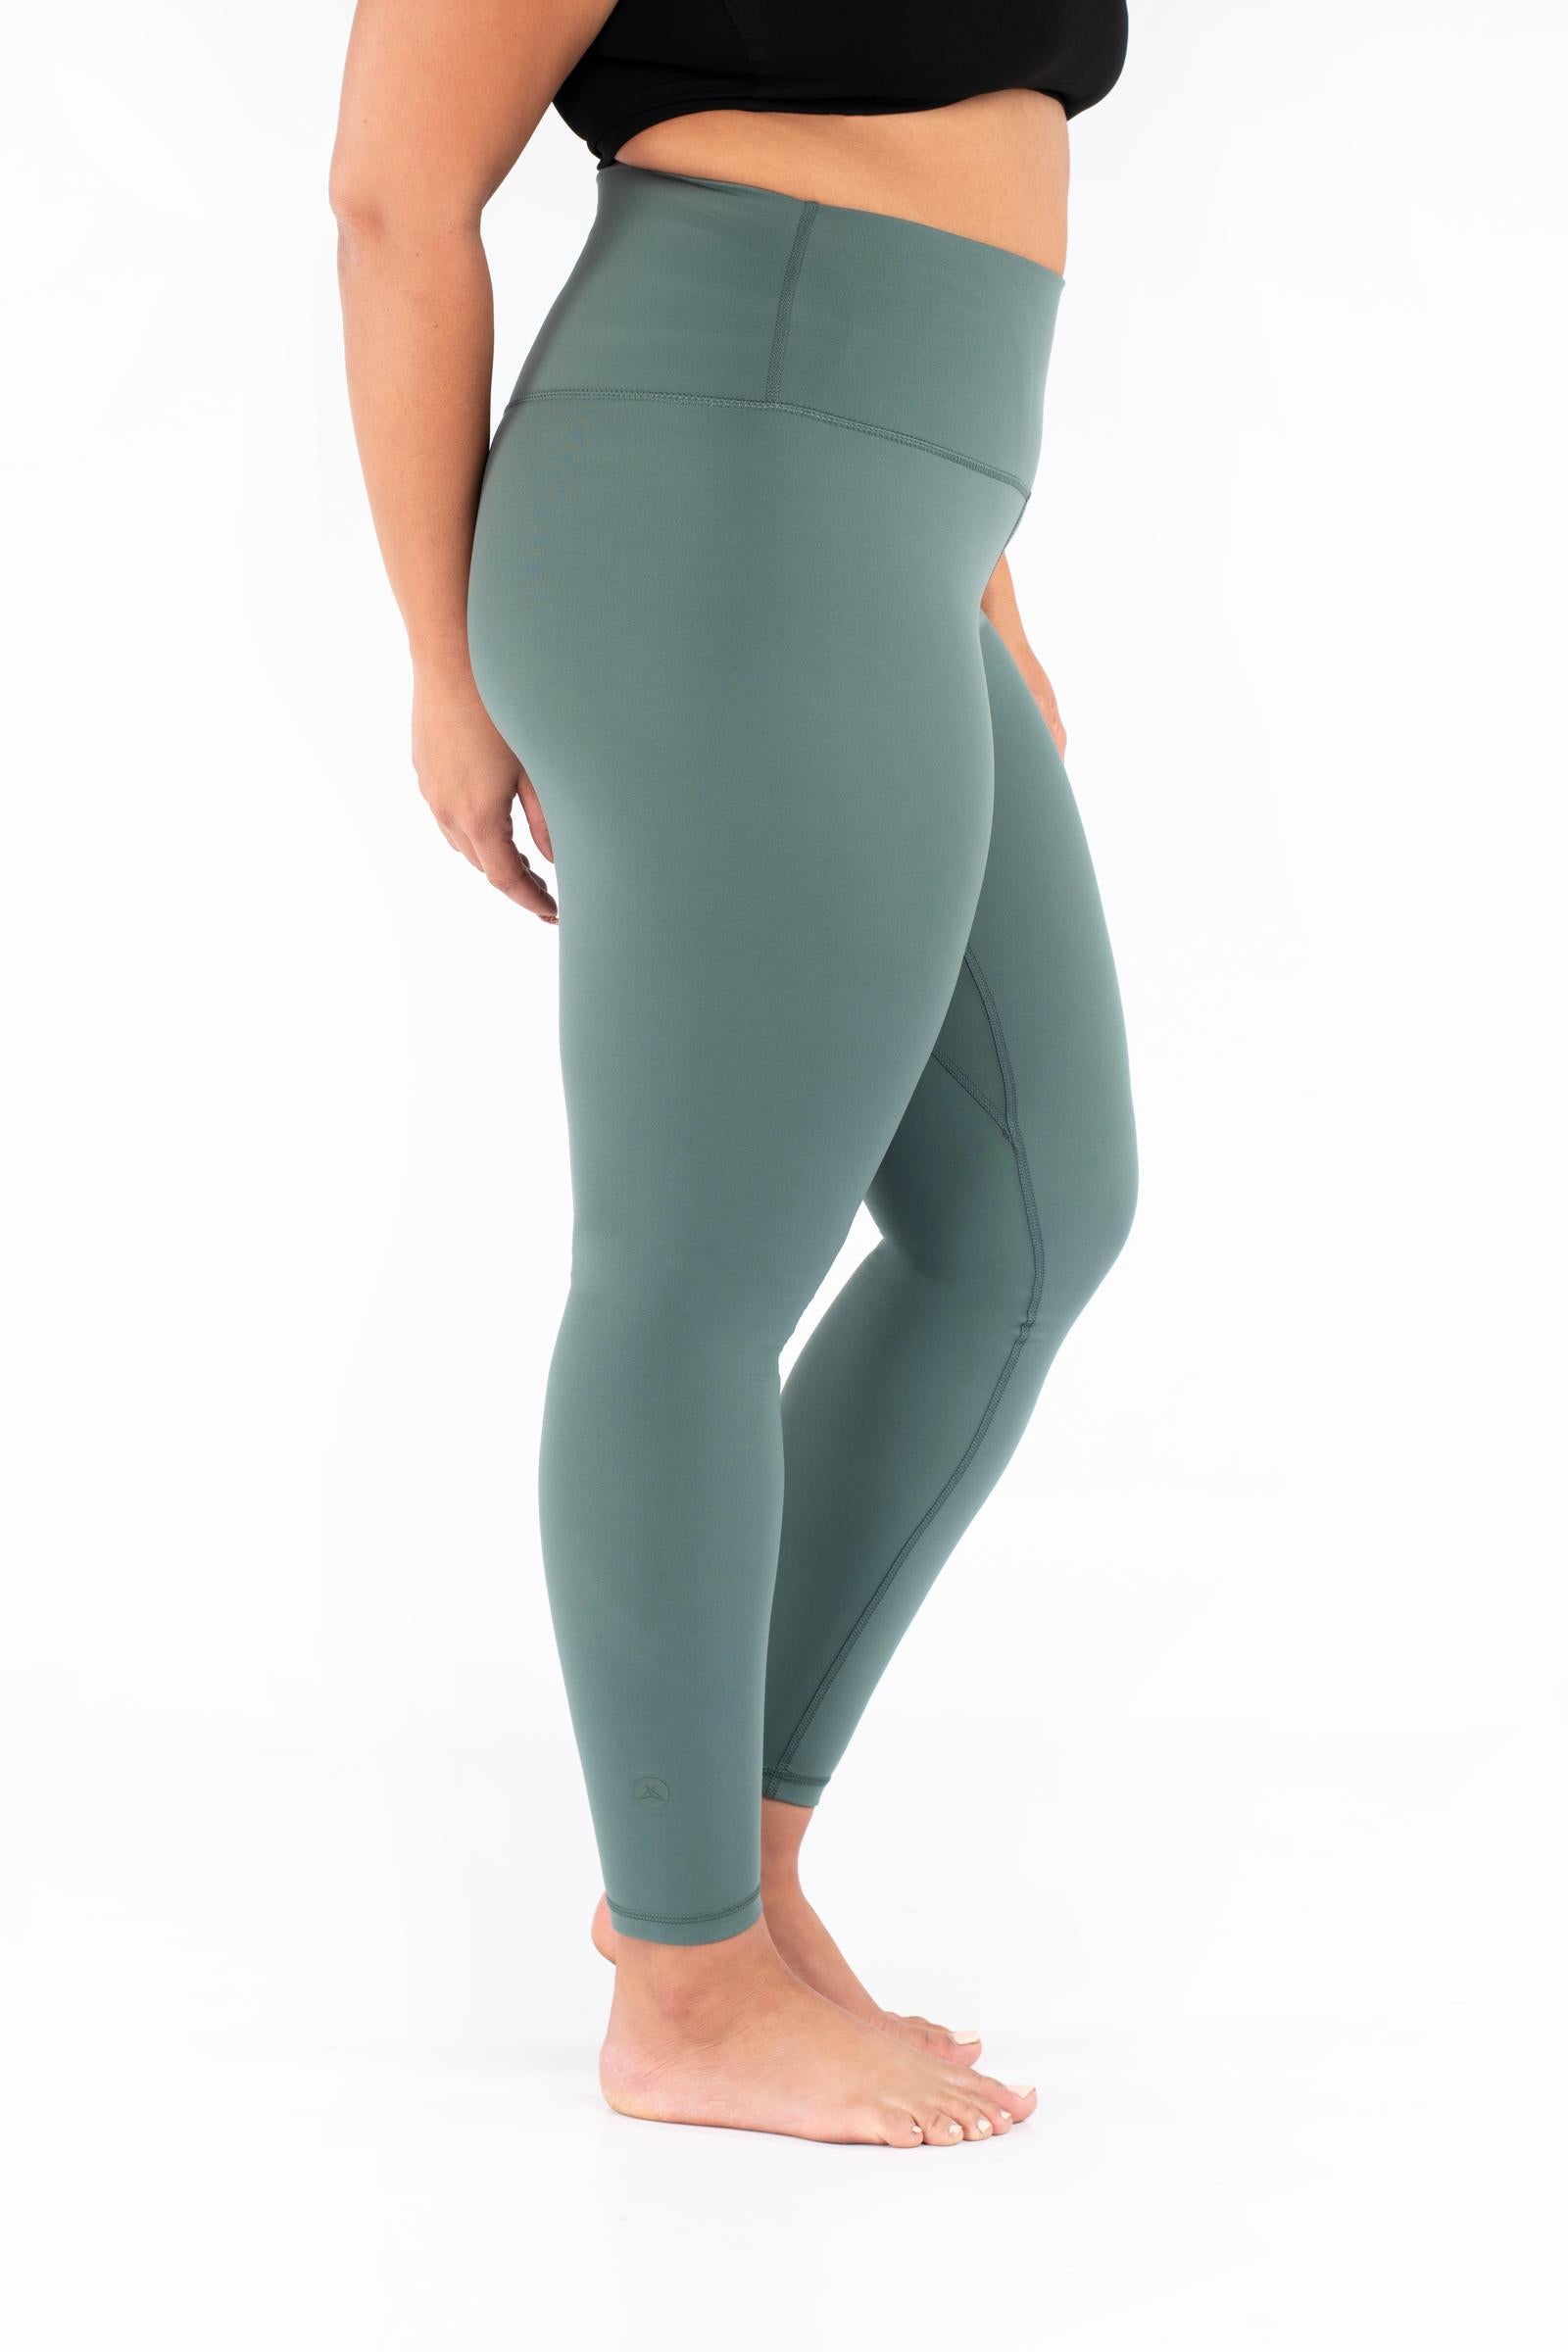 GetUSCart- Gayhay High Waisted Leggings for Women - Soft Opaque